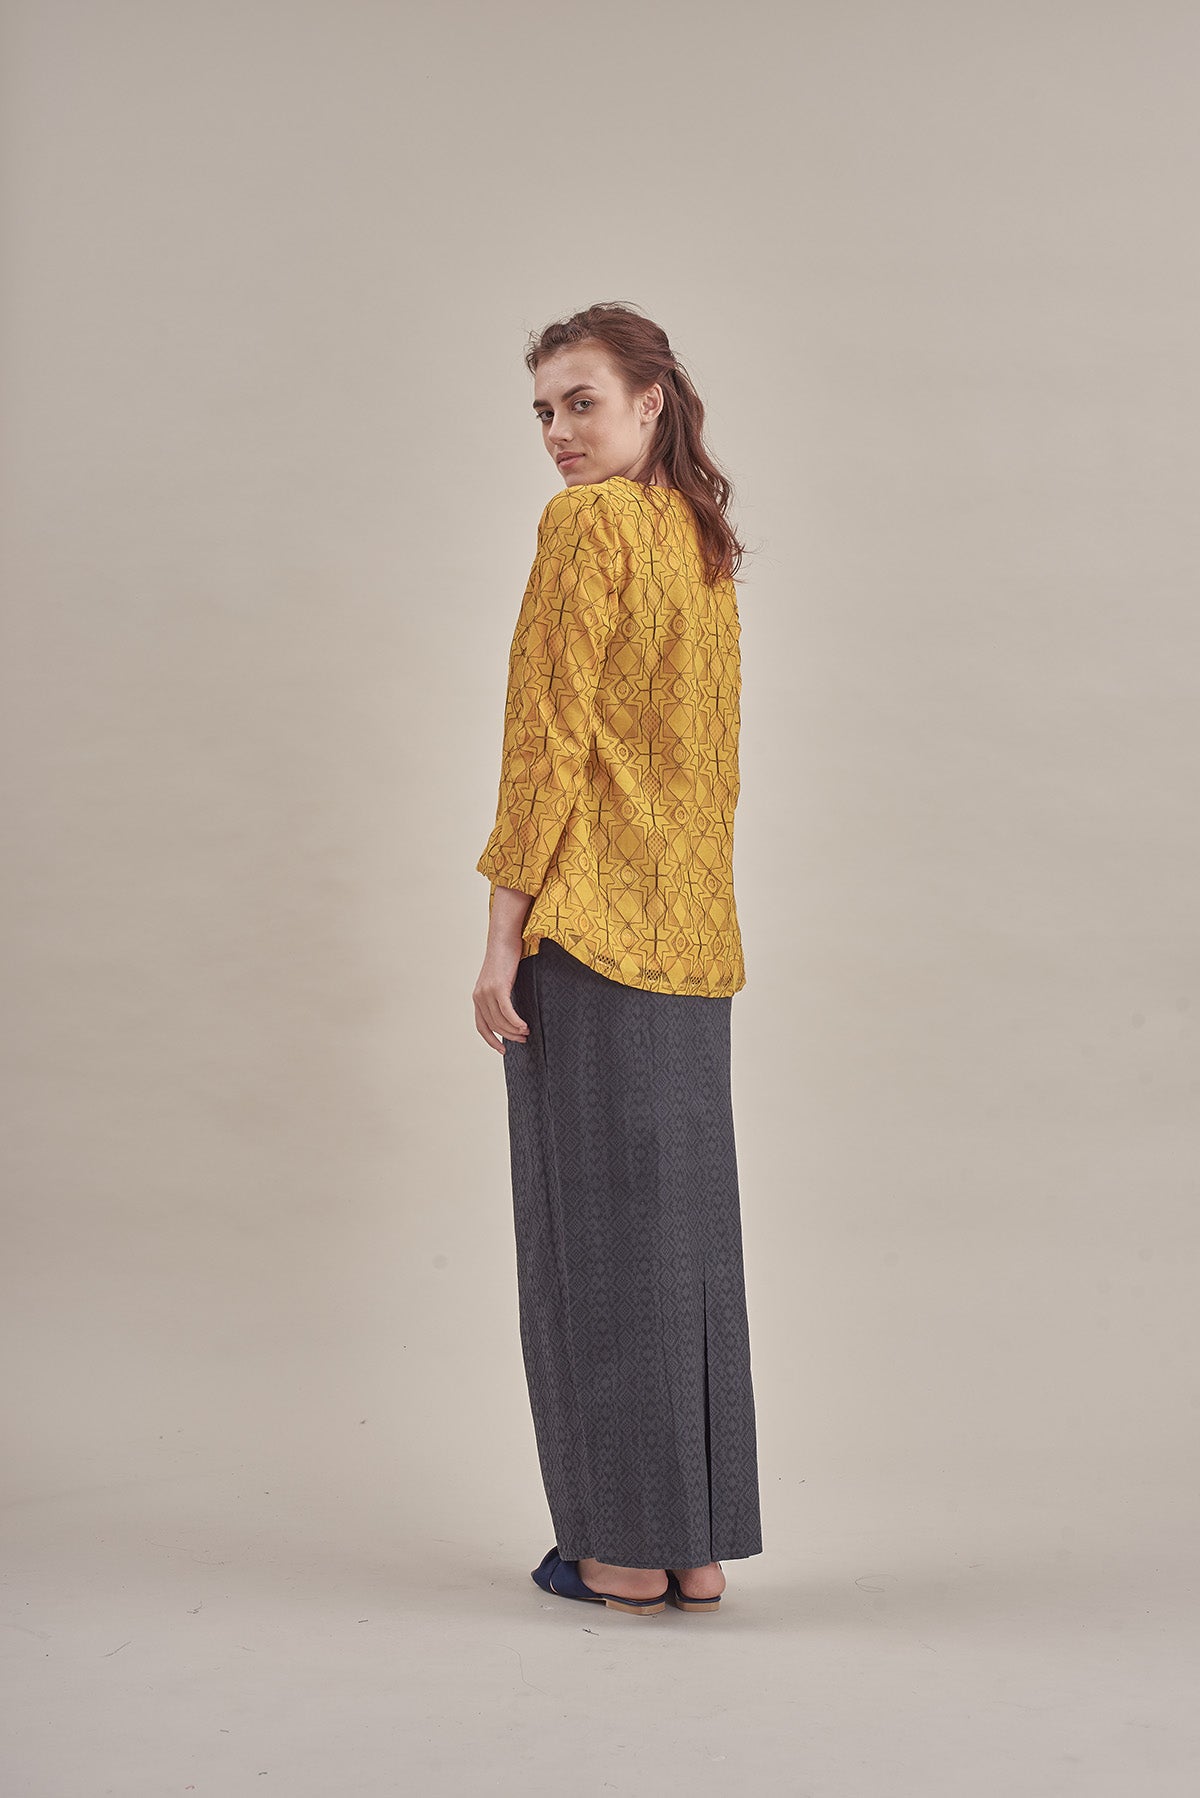 Aleena Lace Top in Mustard